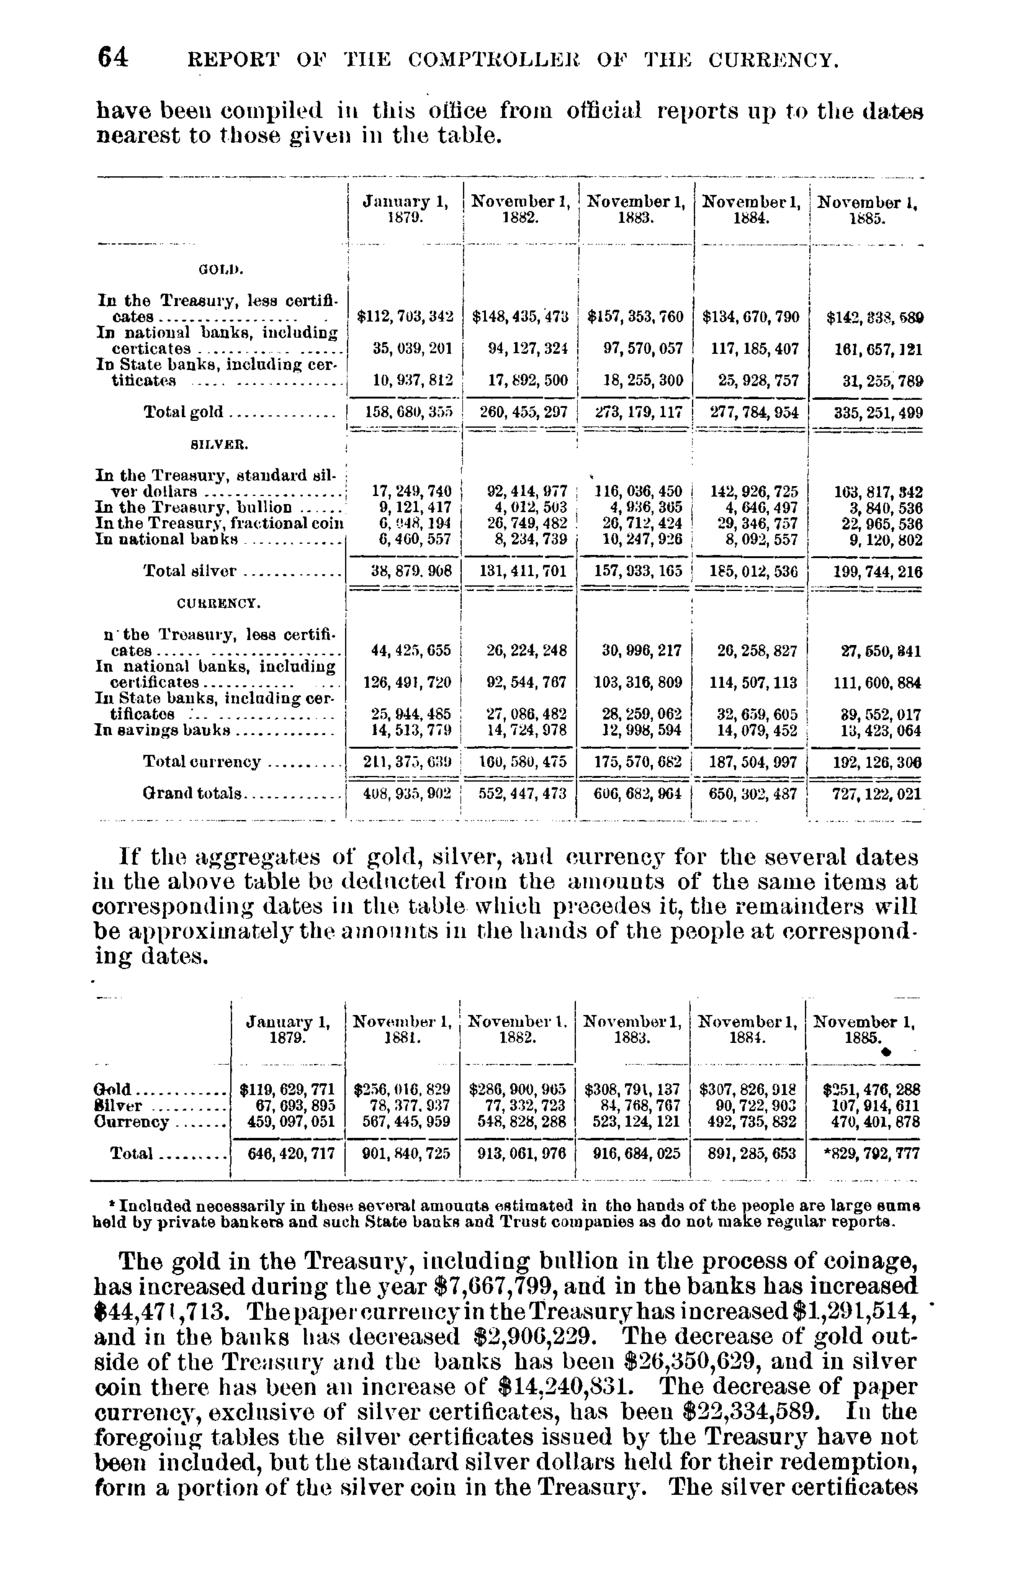 64 REPORT OF THE COMPTROLLER OF THE CURRENCY. have been compiled in this office from official reports up to the dates nearest to those given in the table. January 1, November 1, November 1, 1D7O 1879.